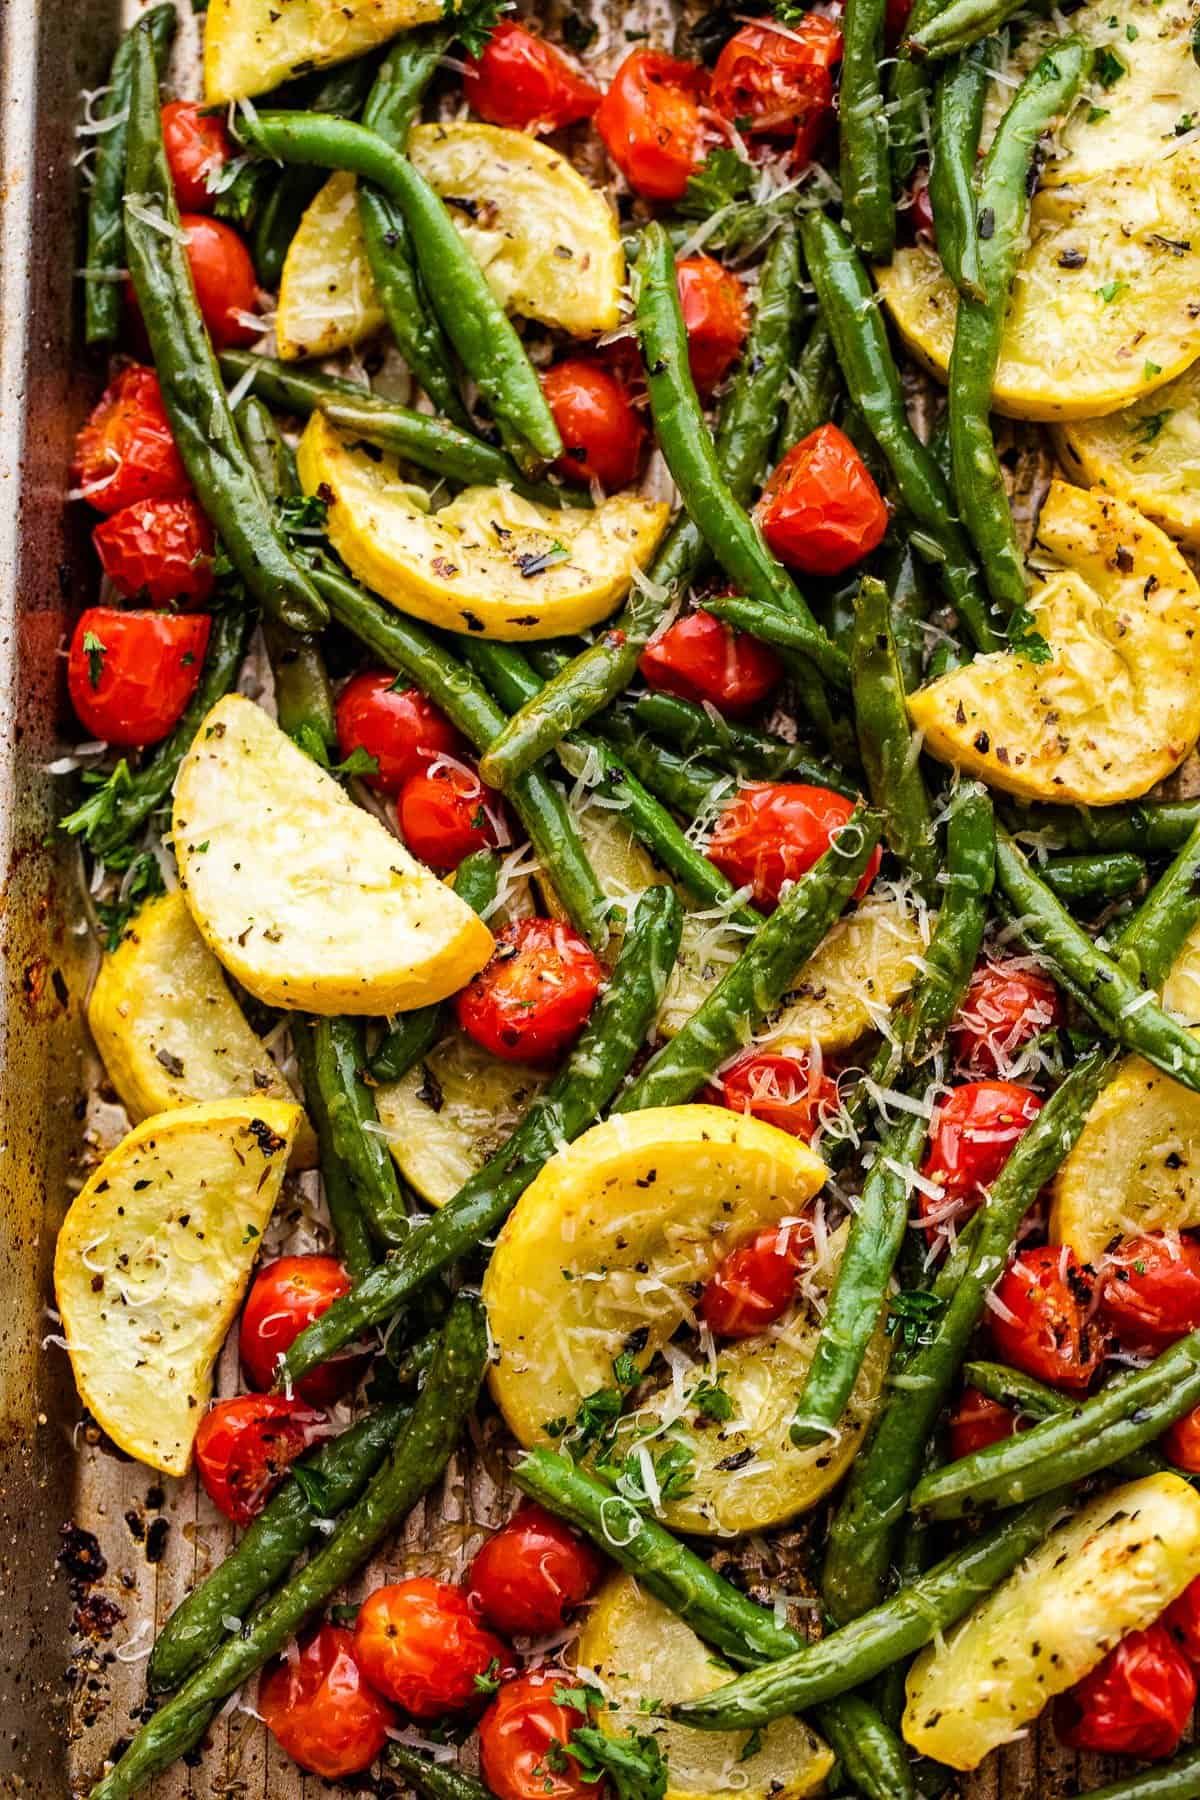 roasted cherry tomatoes, green beans, and yellow squash, and topped with shredded parmesan cheese